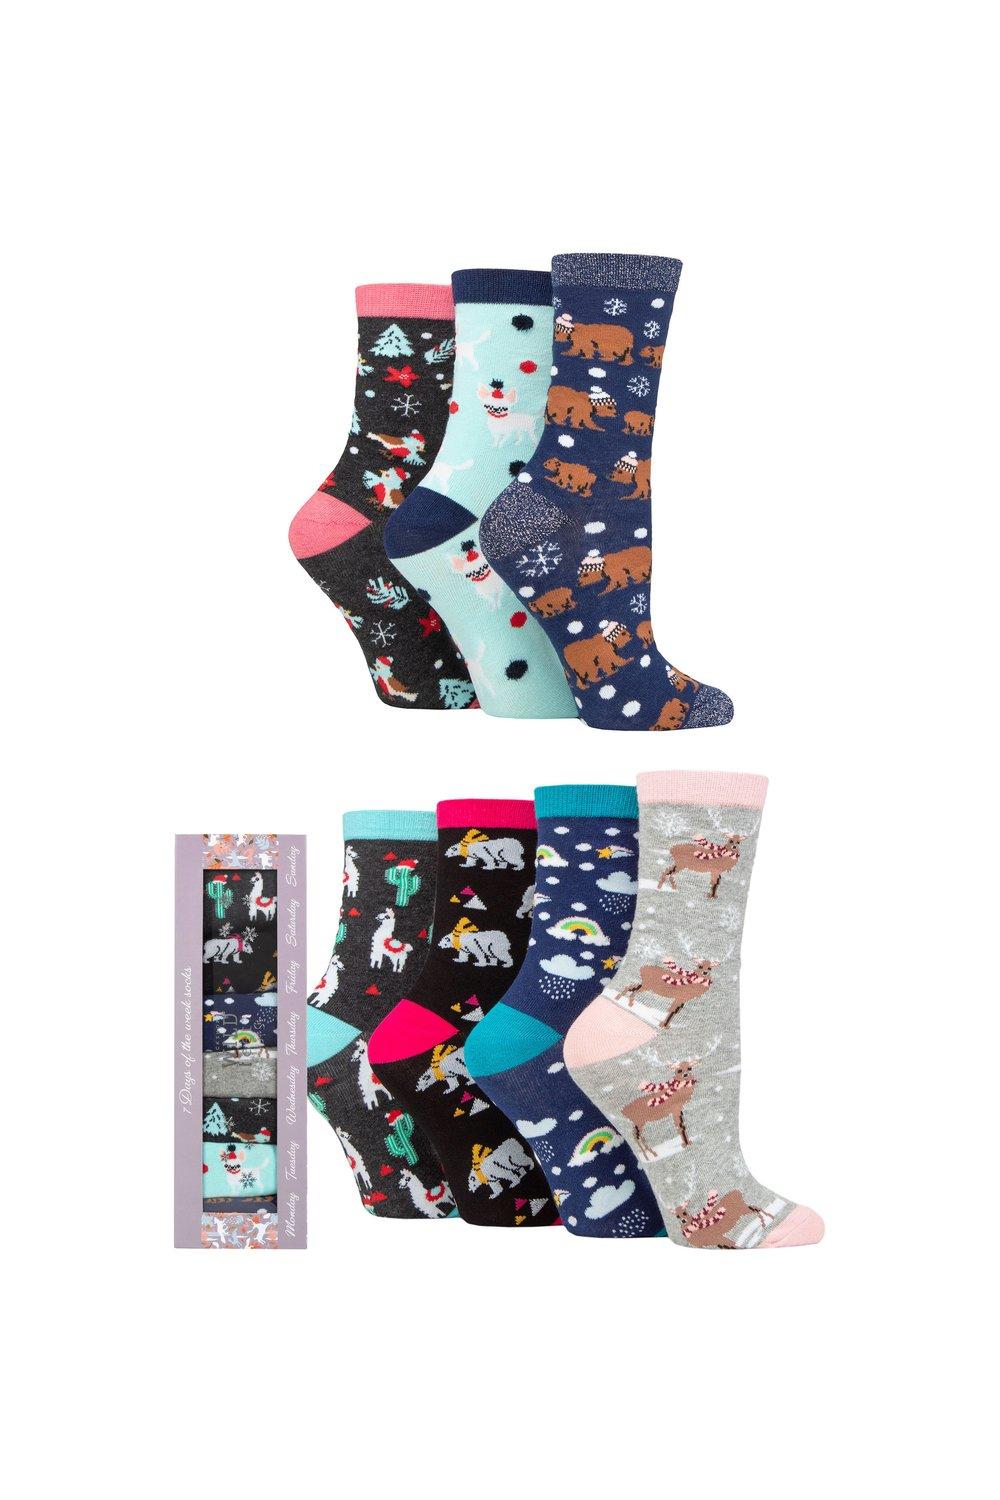 7 Pair 7 Days of the Week Gift Boxed Socks